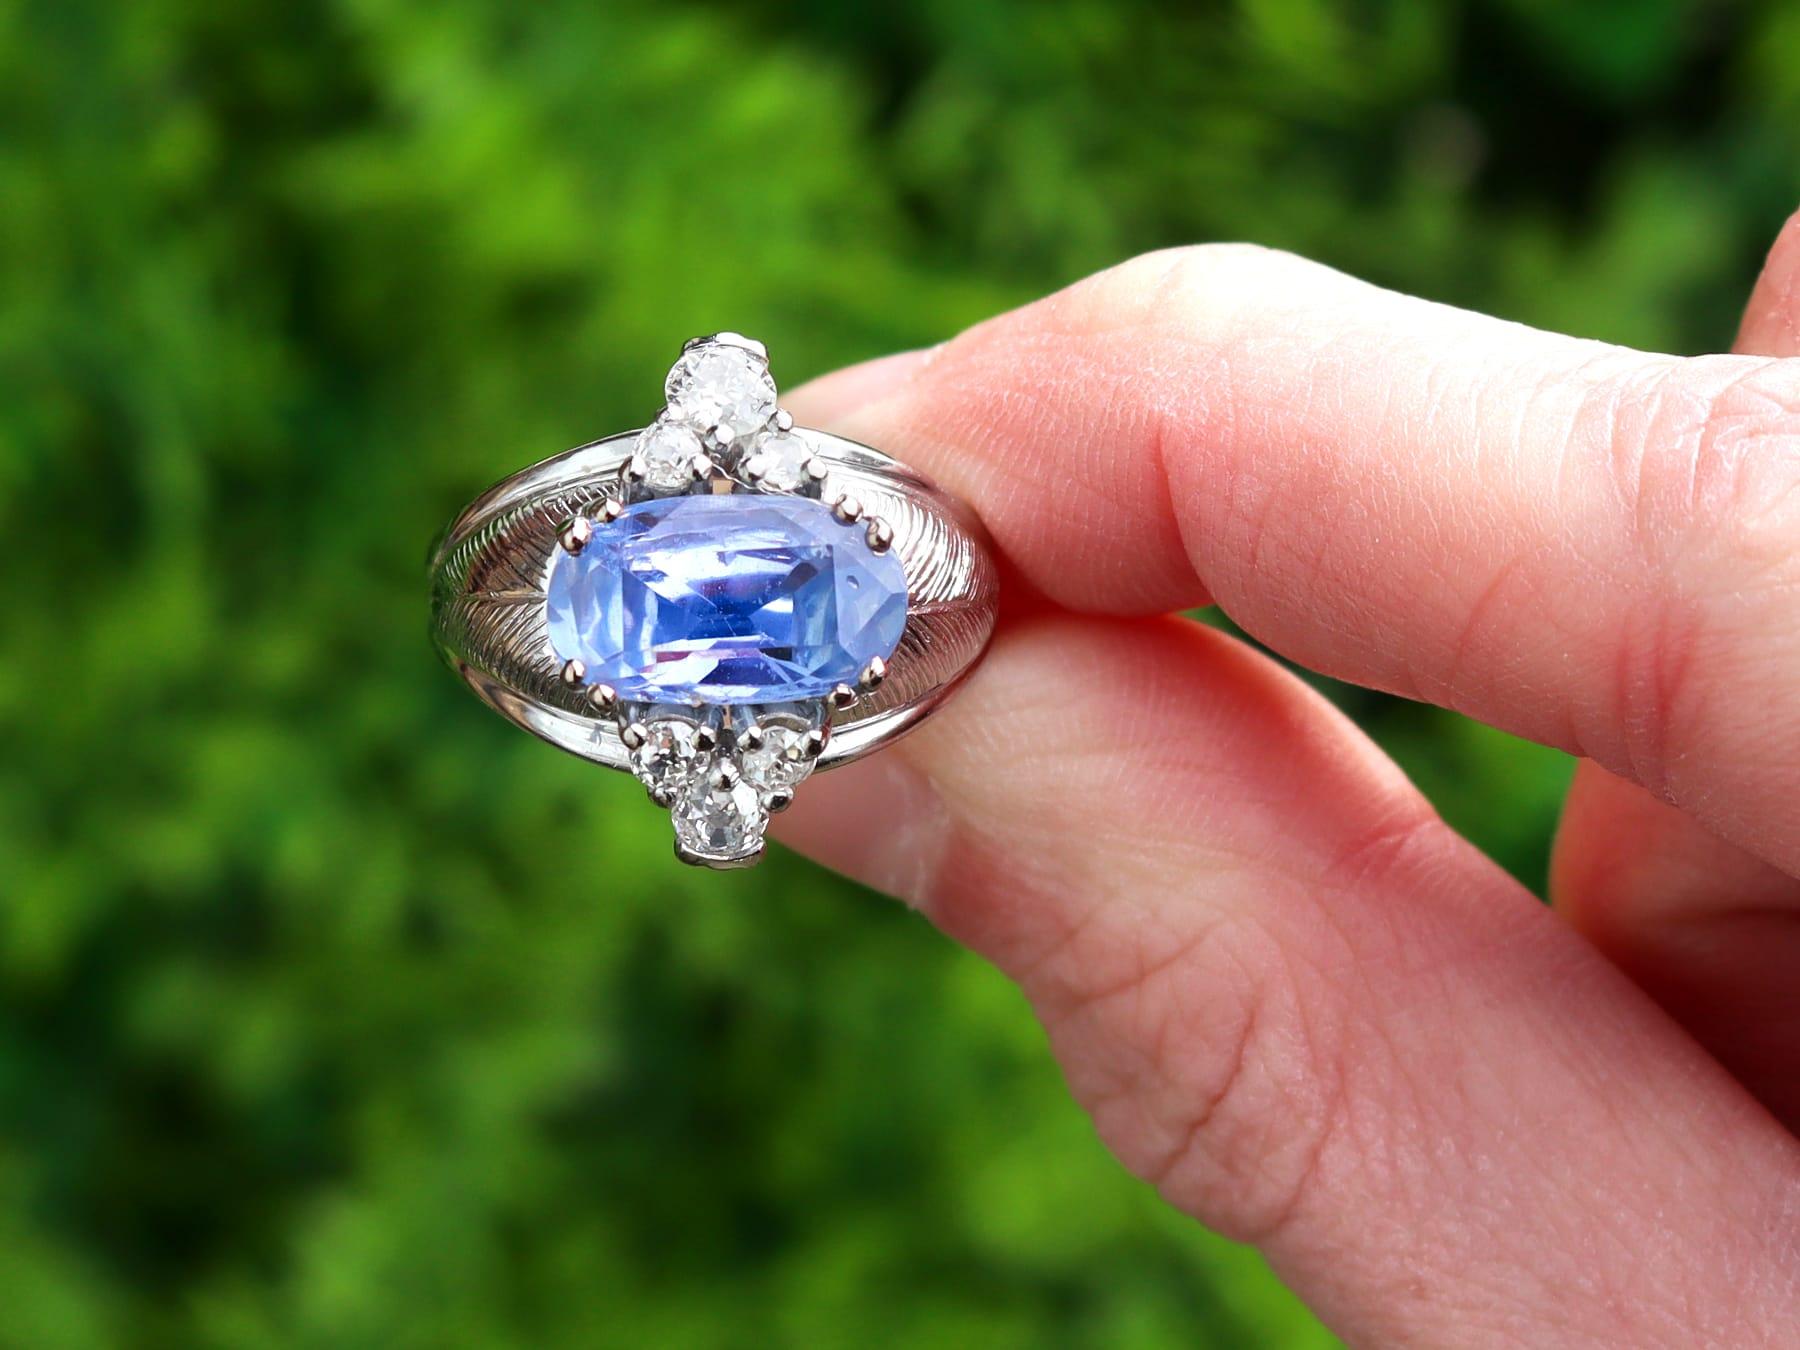 A stunning, fine and impressive vintage 4.60 carat Ceylon blue sapphire and antique 0.82 carat diamond, 18 karat white gold dress ring; an addition to our diamond and gemstone jewellery and estate jewelry collections.

This fine and impressive